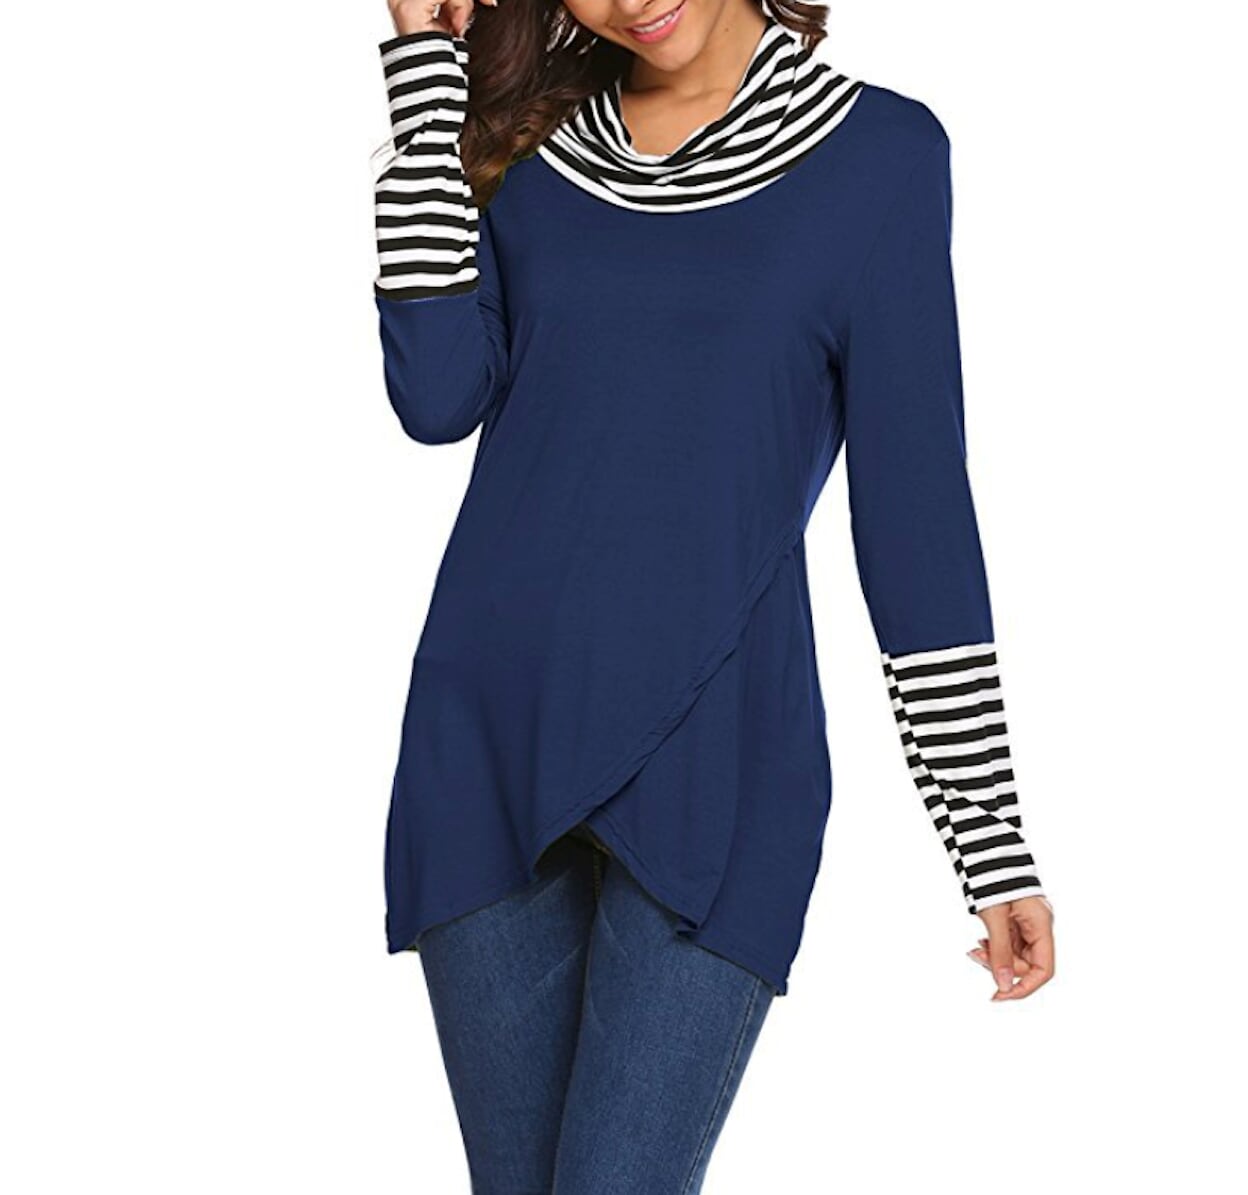 Womens Cowl Neck Casual Top